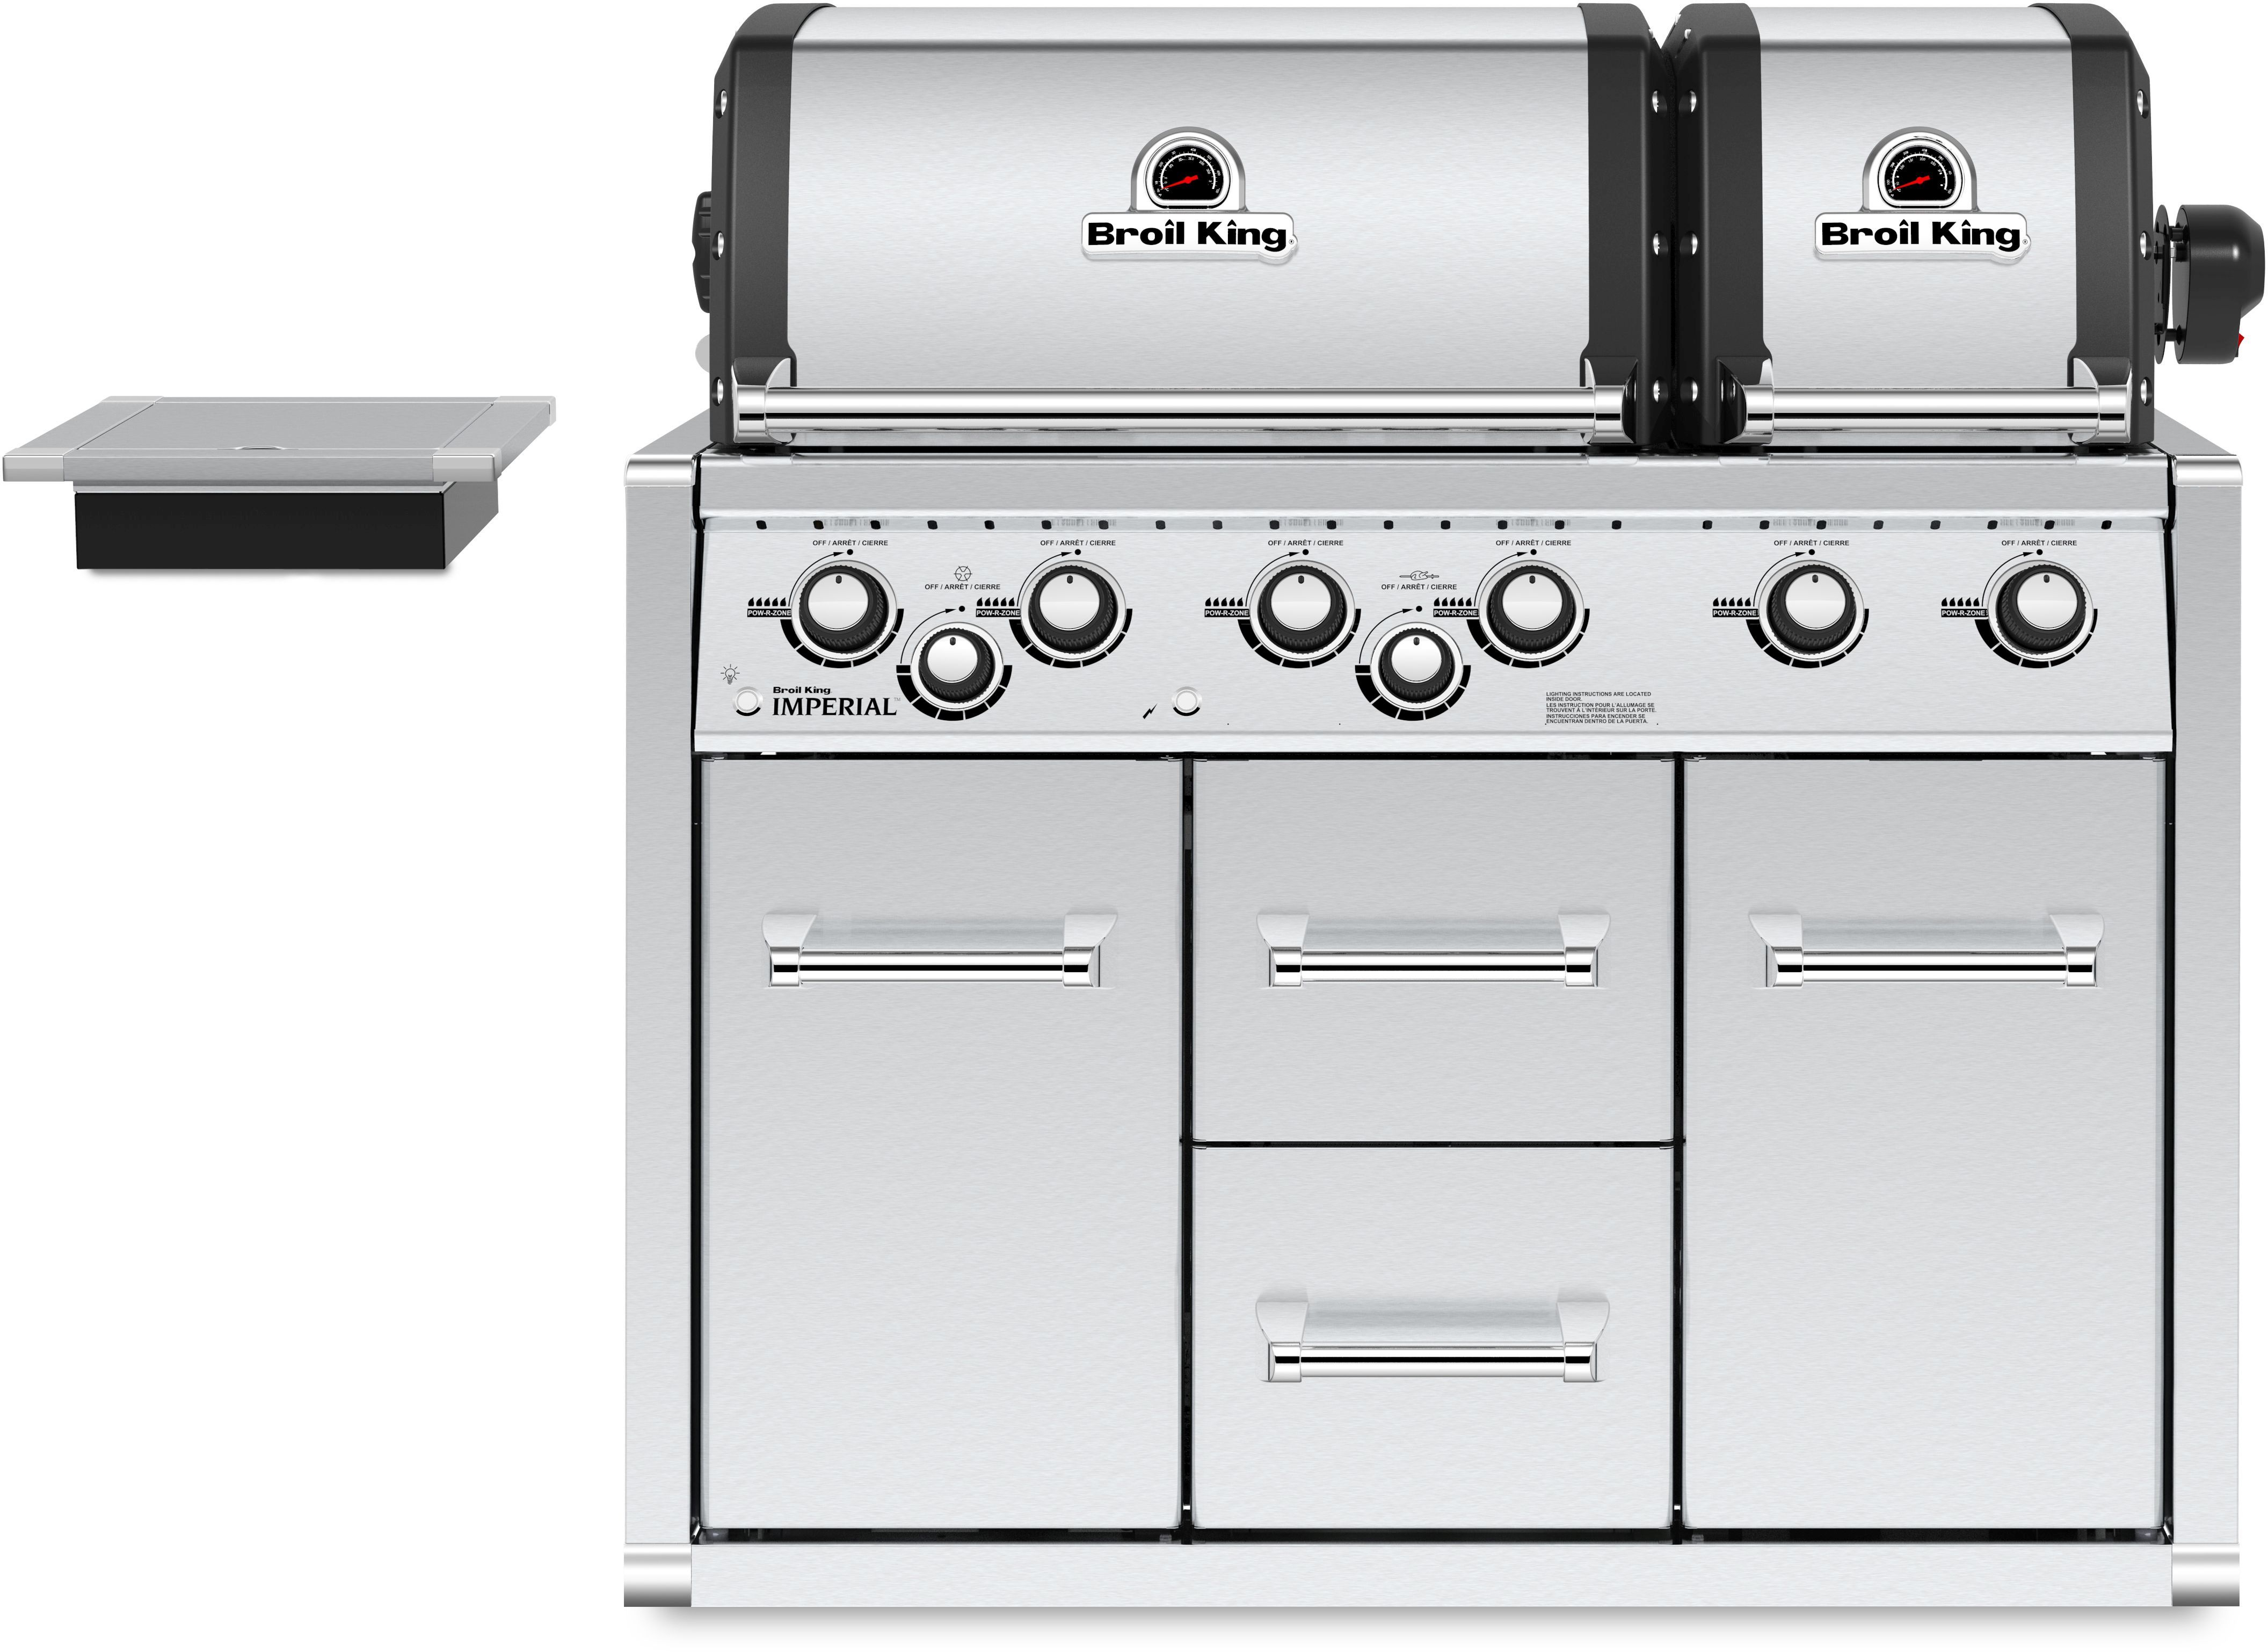 Broil King® Imperial™ XLS 27" Stainless Steel Built-In Grill with Cabinet